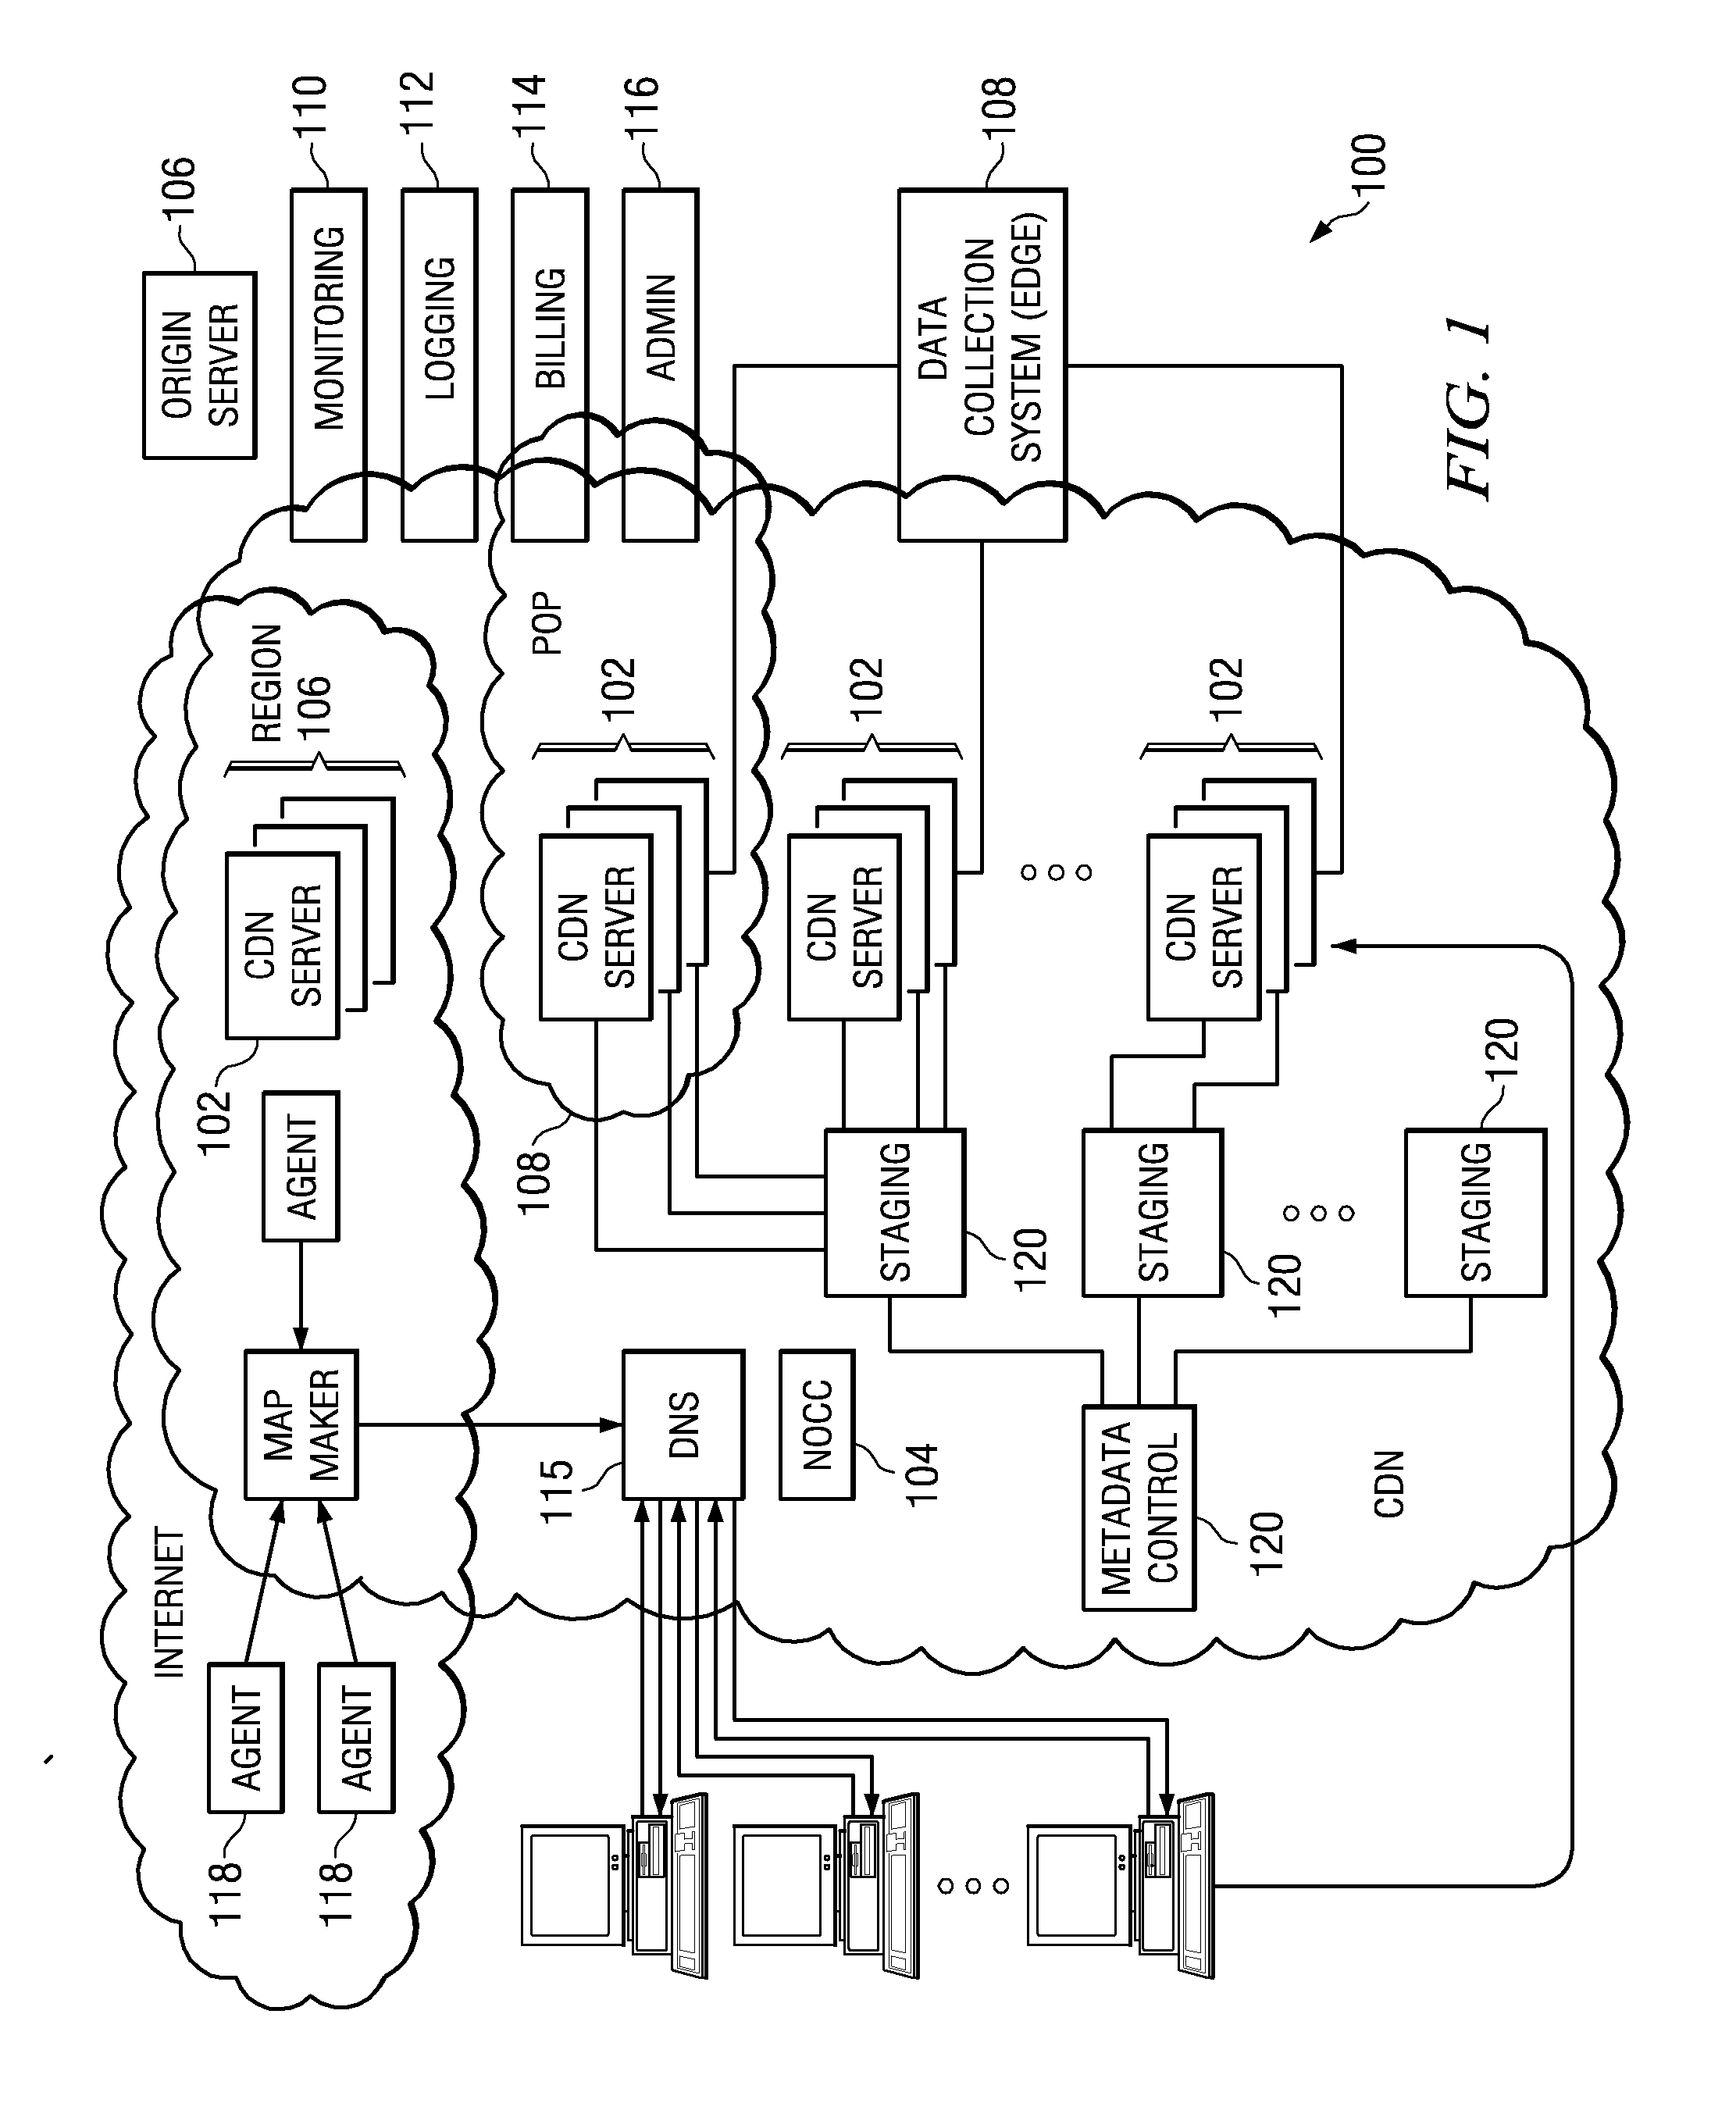 Method and system for identifying valid users operating across a distributed network